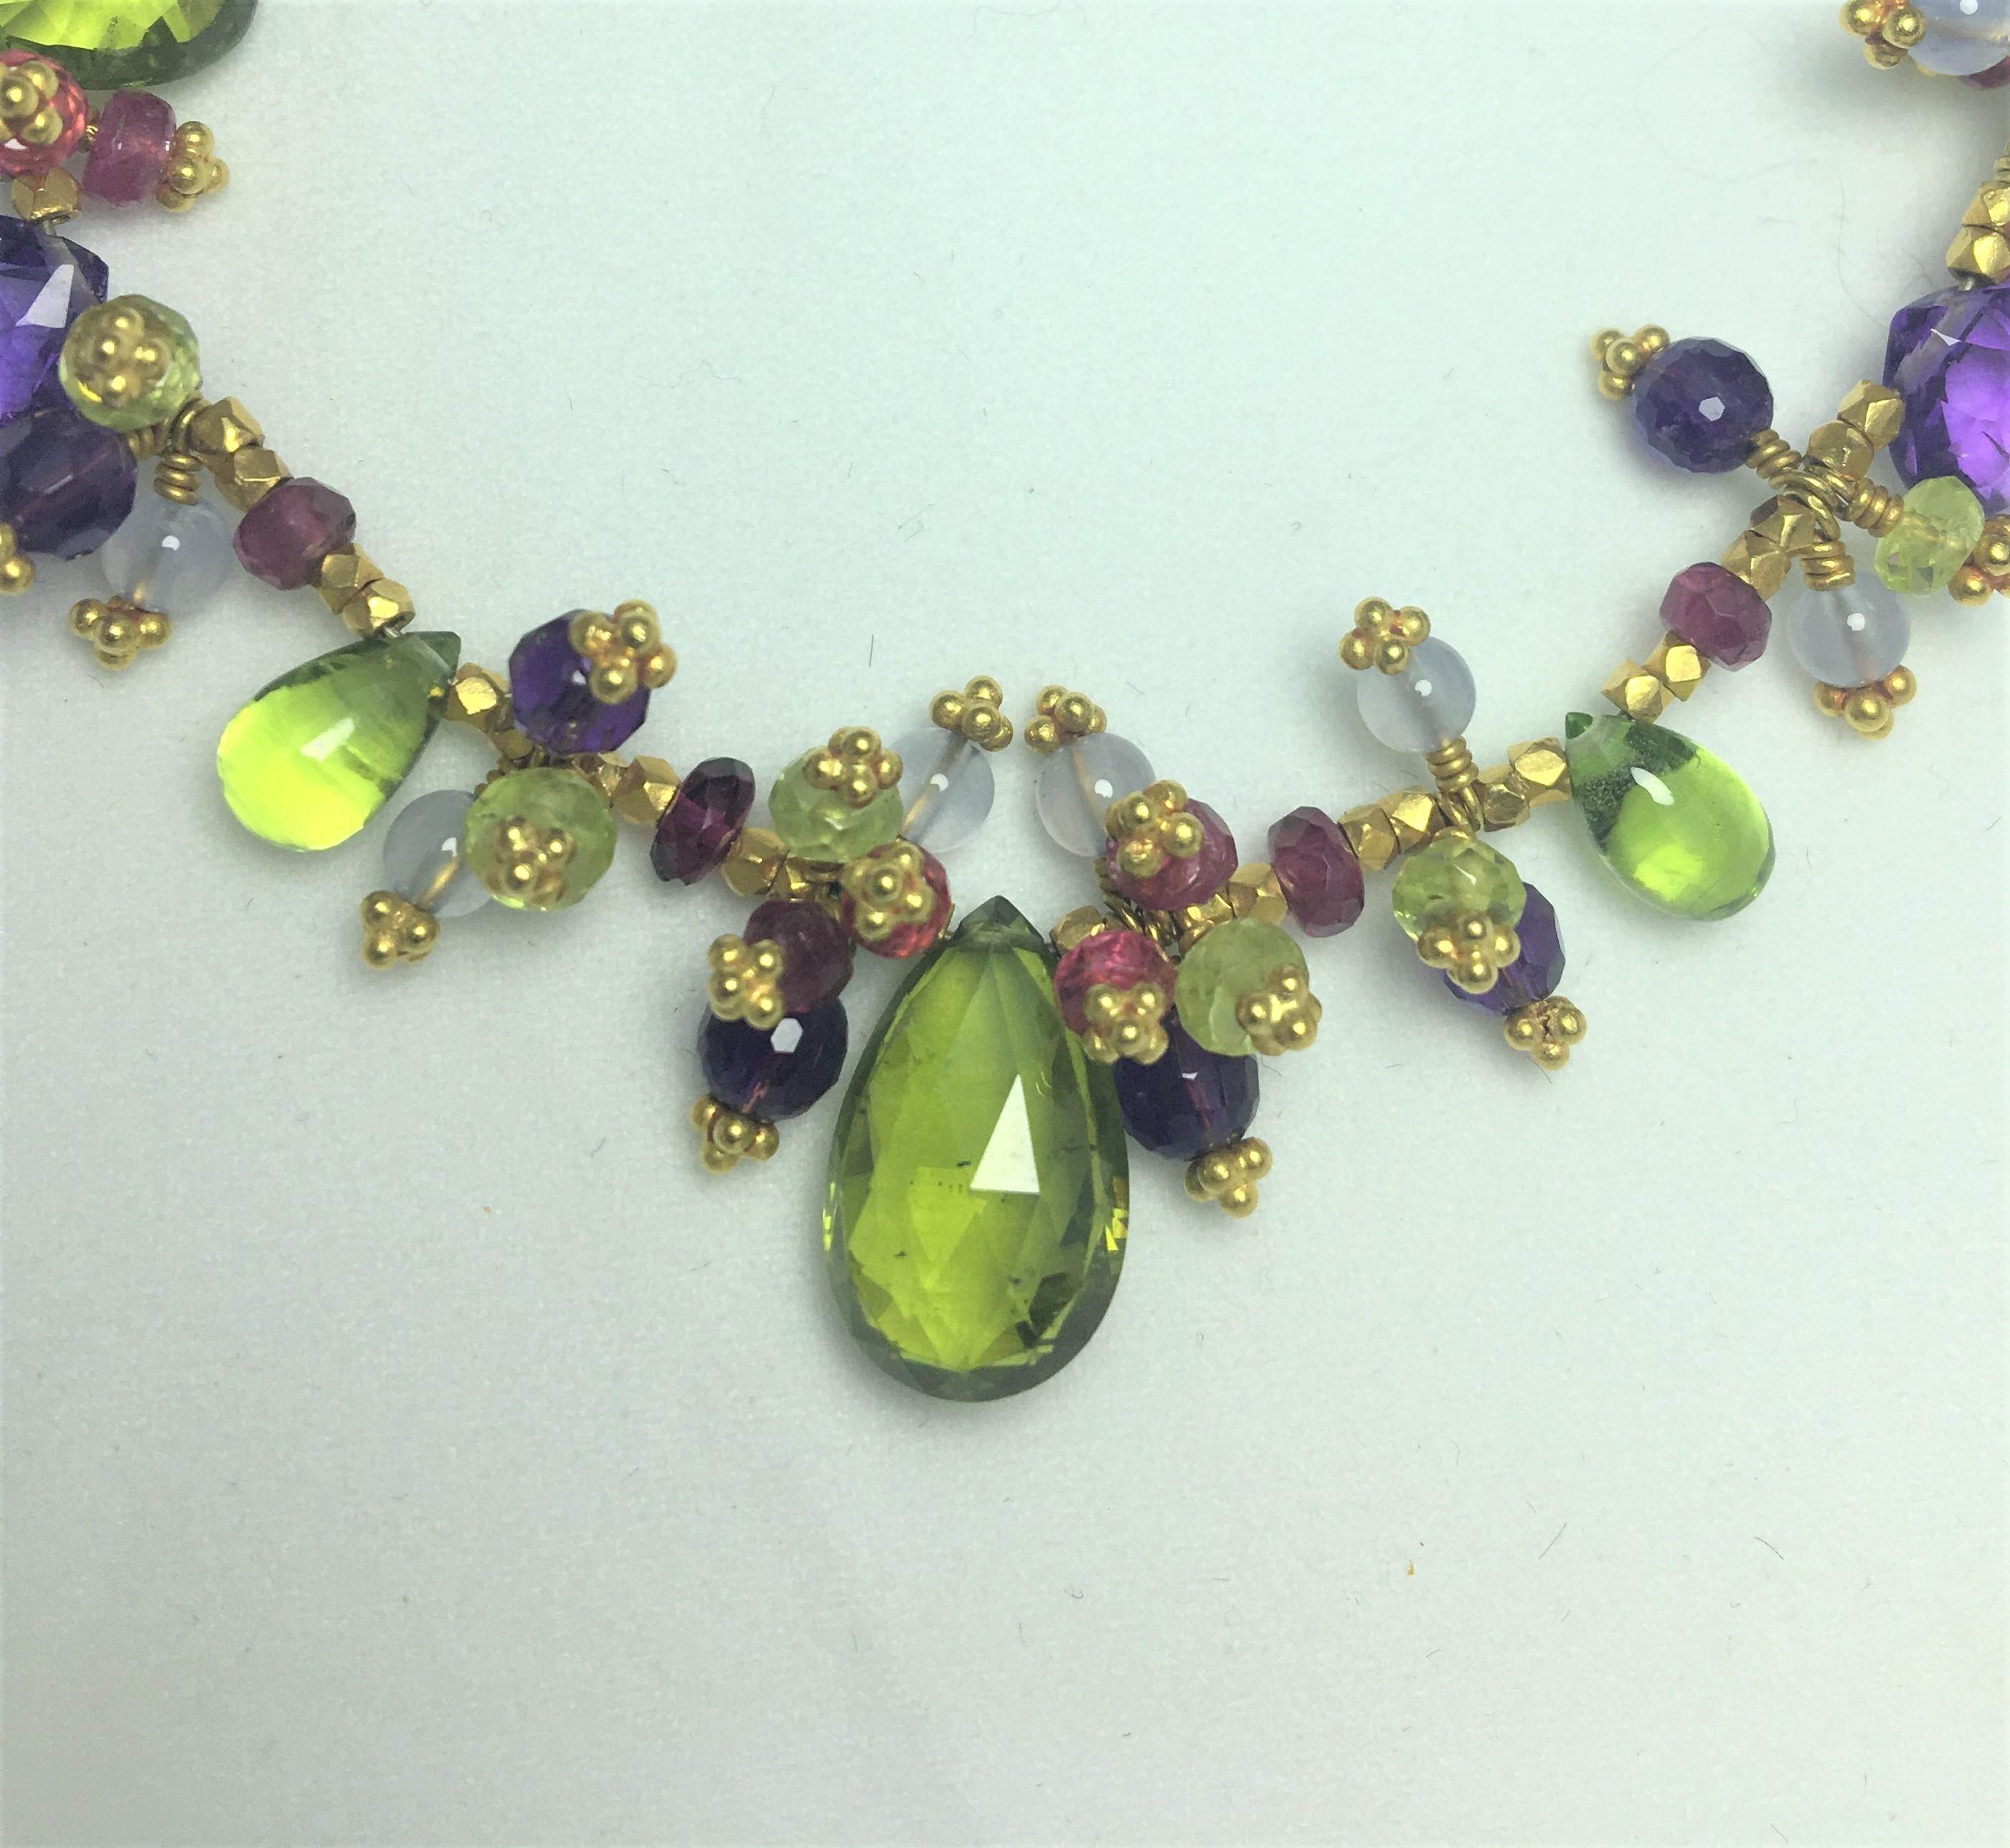 Laura Gibson Multi-Color Gemstone Necklace
Amethyst, Pink Tourmaline, Lemon Chrysoberyl, Chalcedony, Spinel, Peridot and Vesuvianite stones, varying shapes and sizes
64.5 carats total weight
22K Yellow Gold
16 inches long, Natural Length 
Toggle